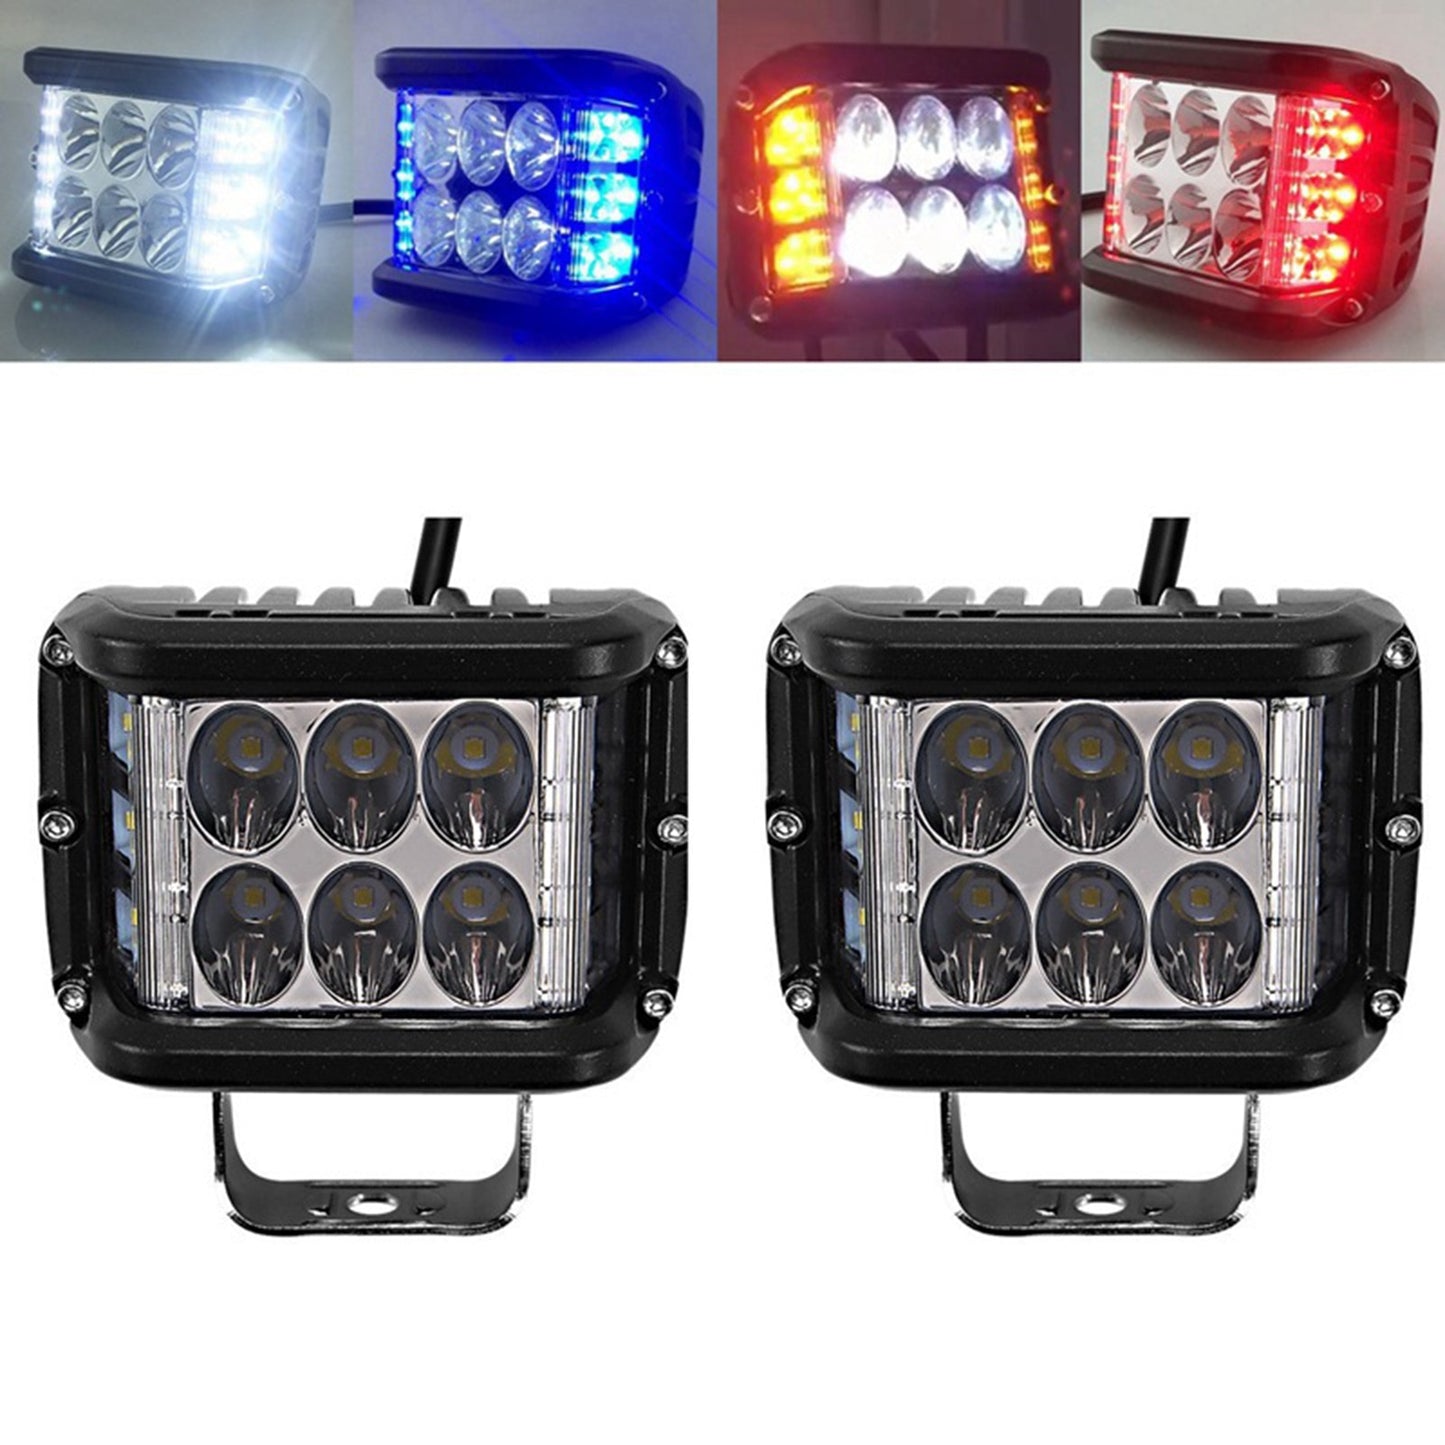 Dual Truck and Boat Strobe Lights - Solutiverse